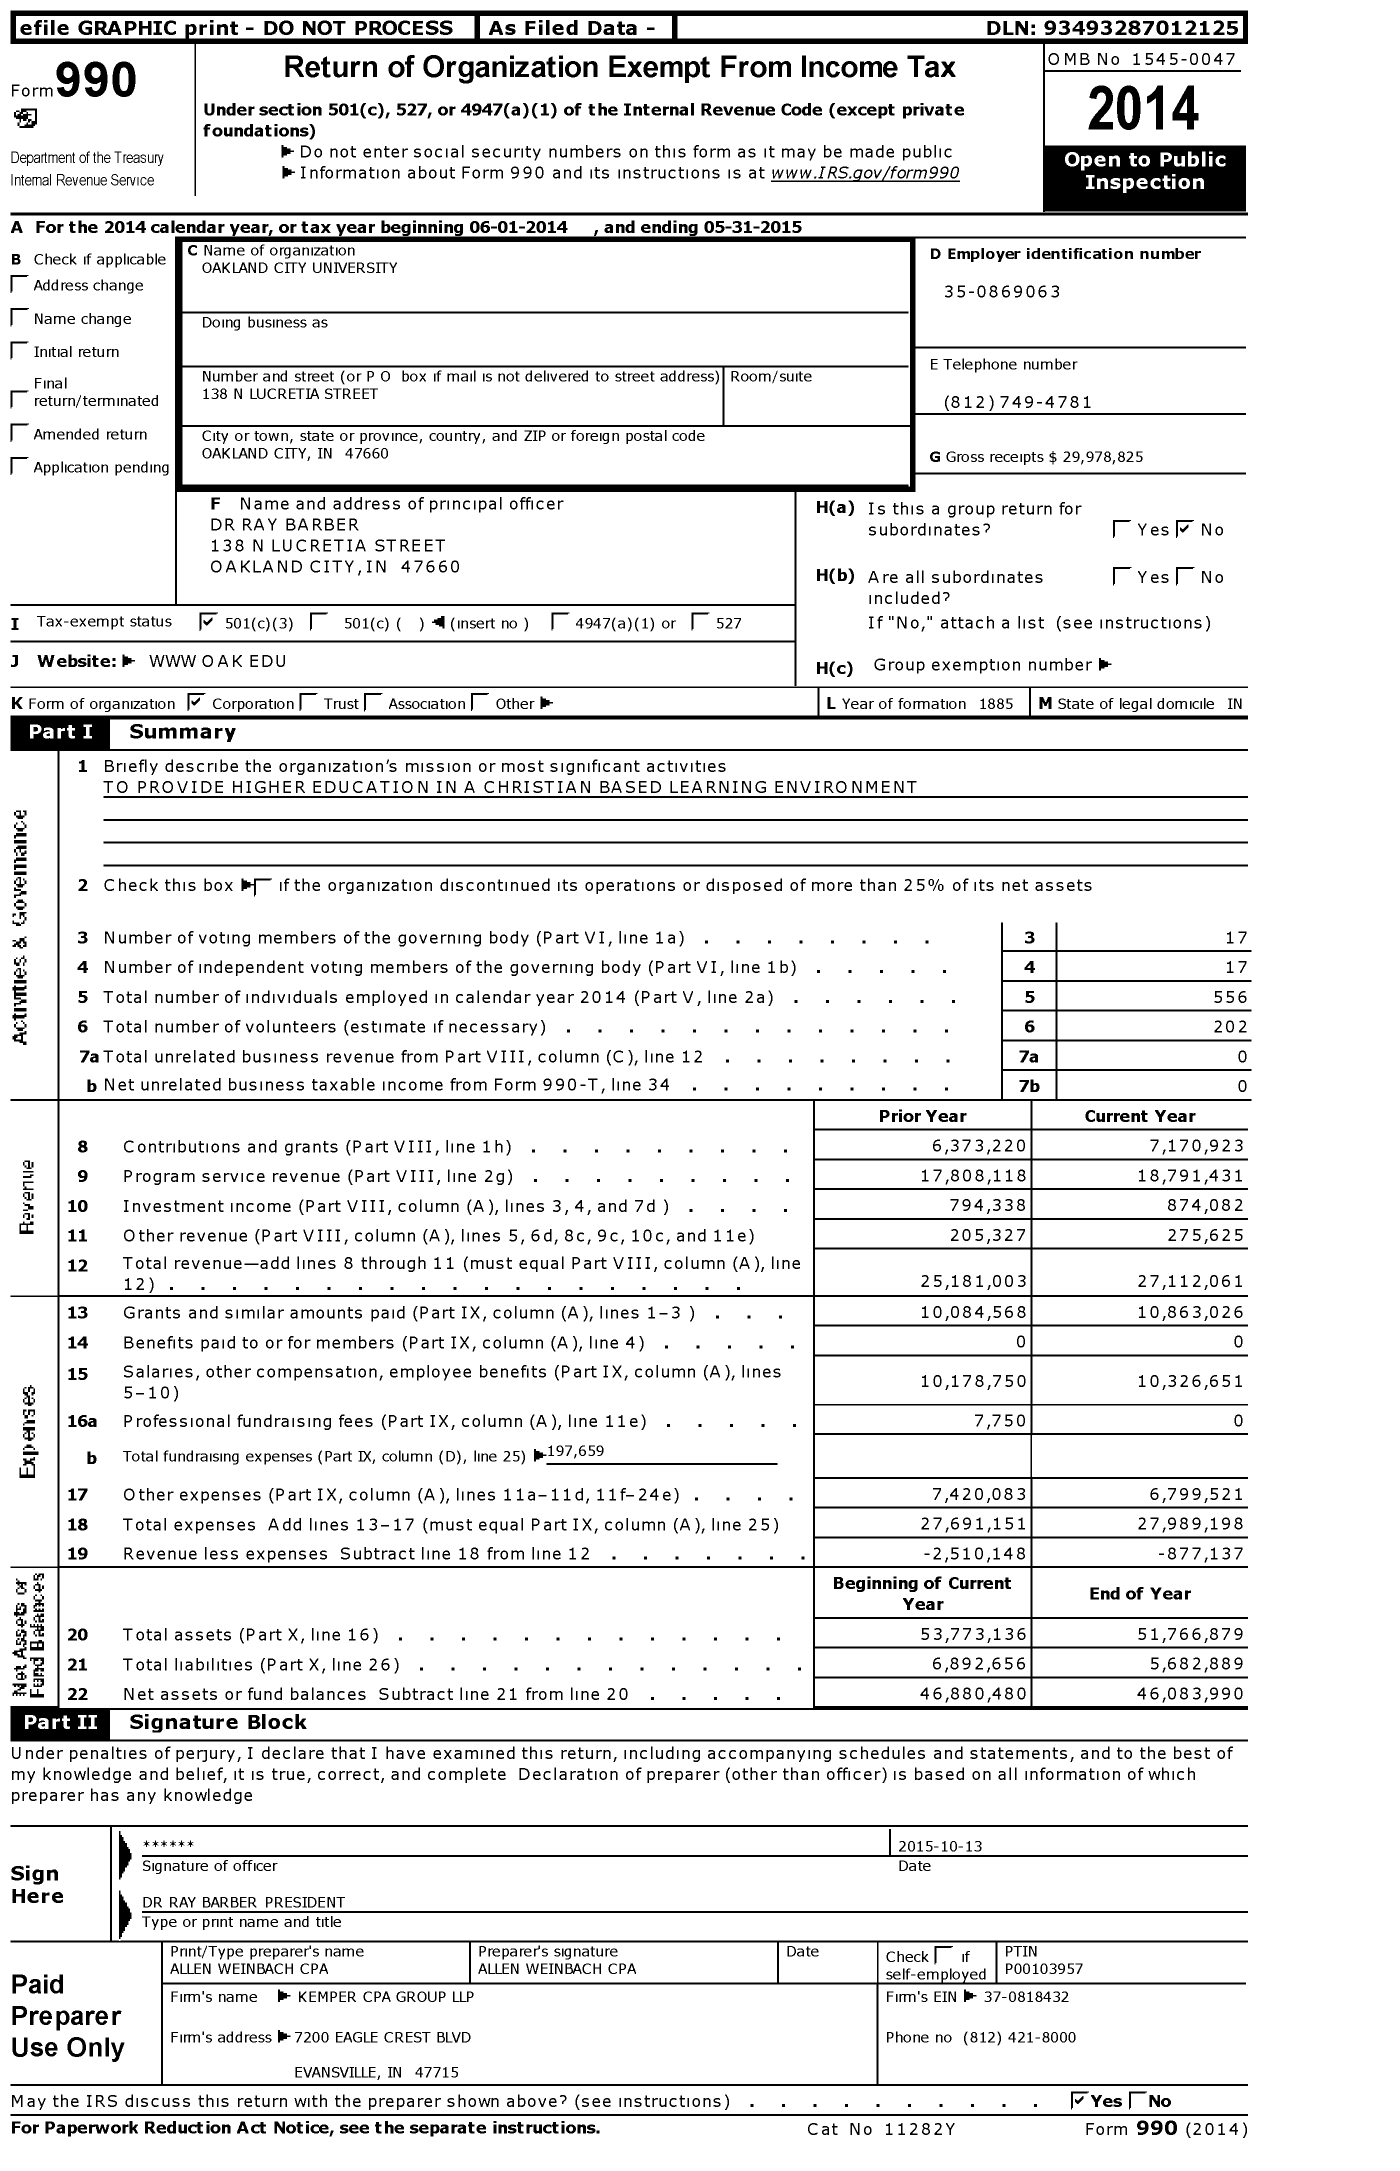 Image of first page of 2014 Form 990 for Oakland City University (OCU)